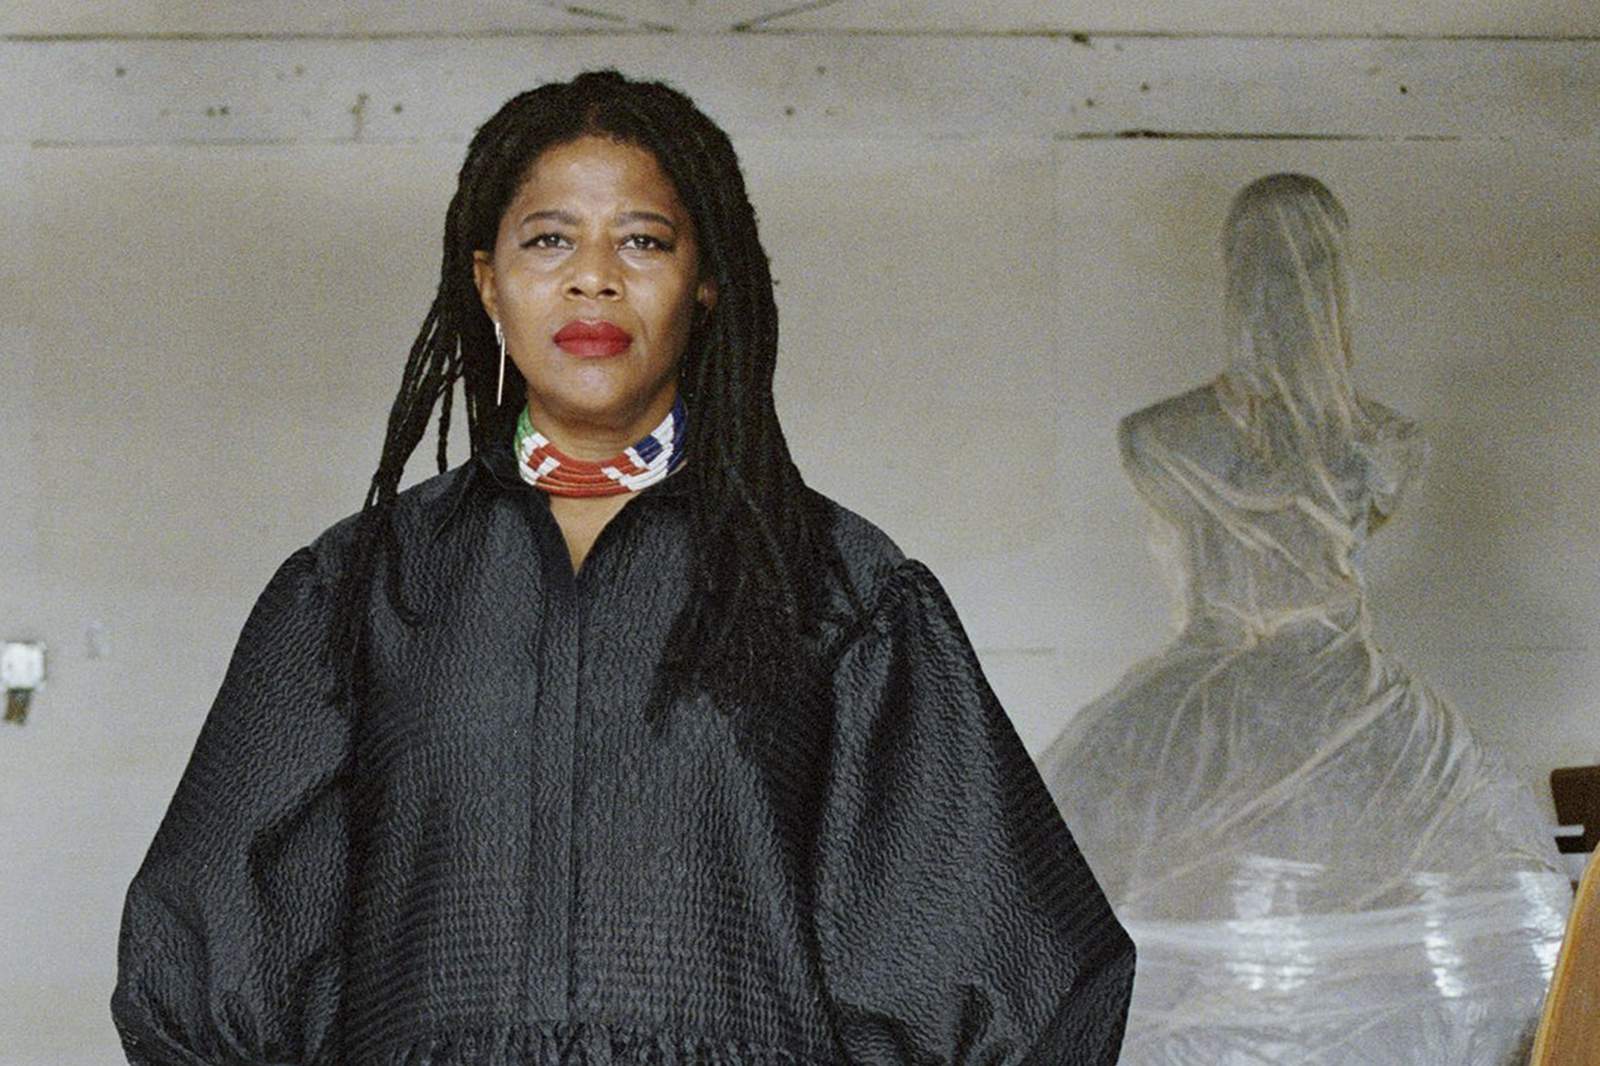 Sculptor will be 1st Black woman to represent US at Biennale